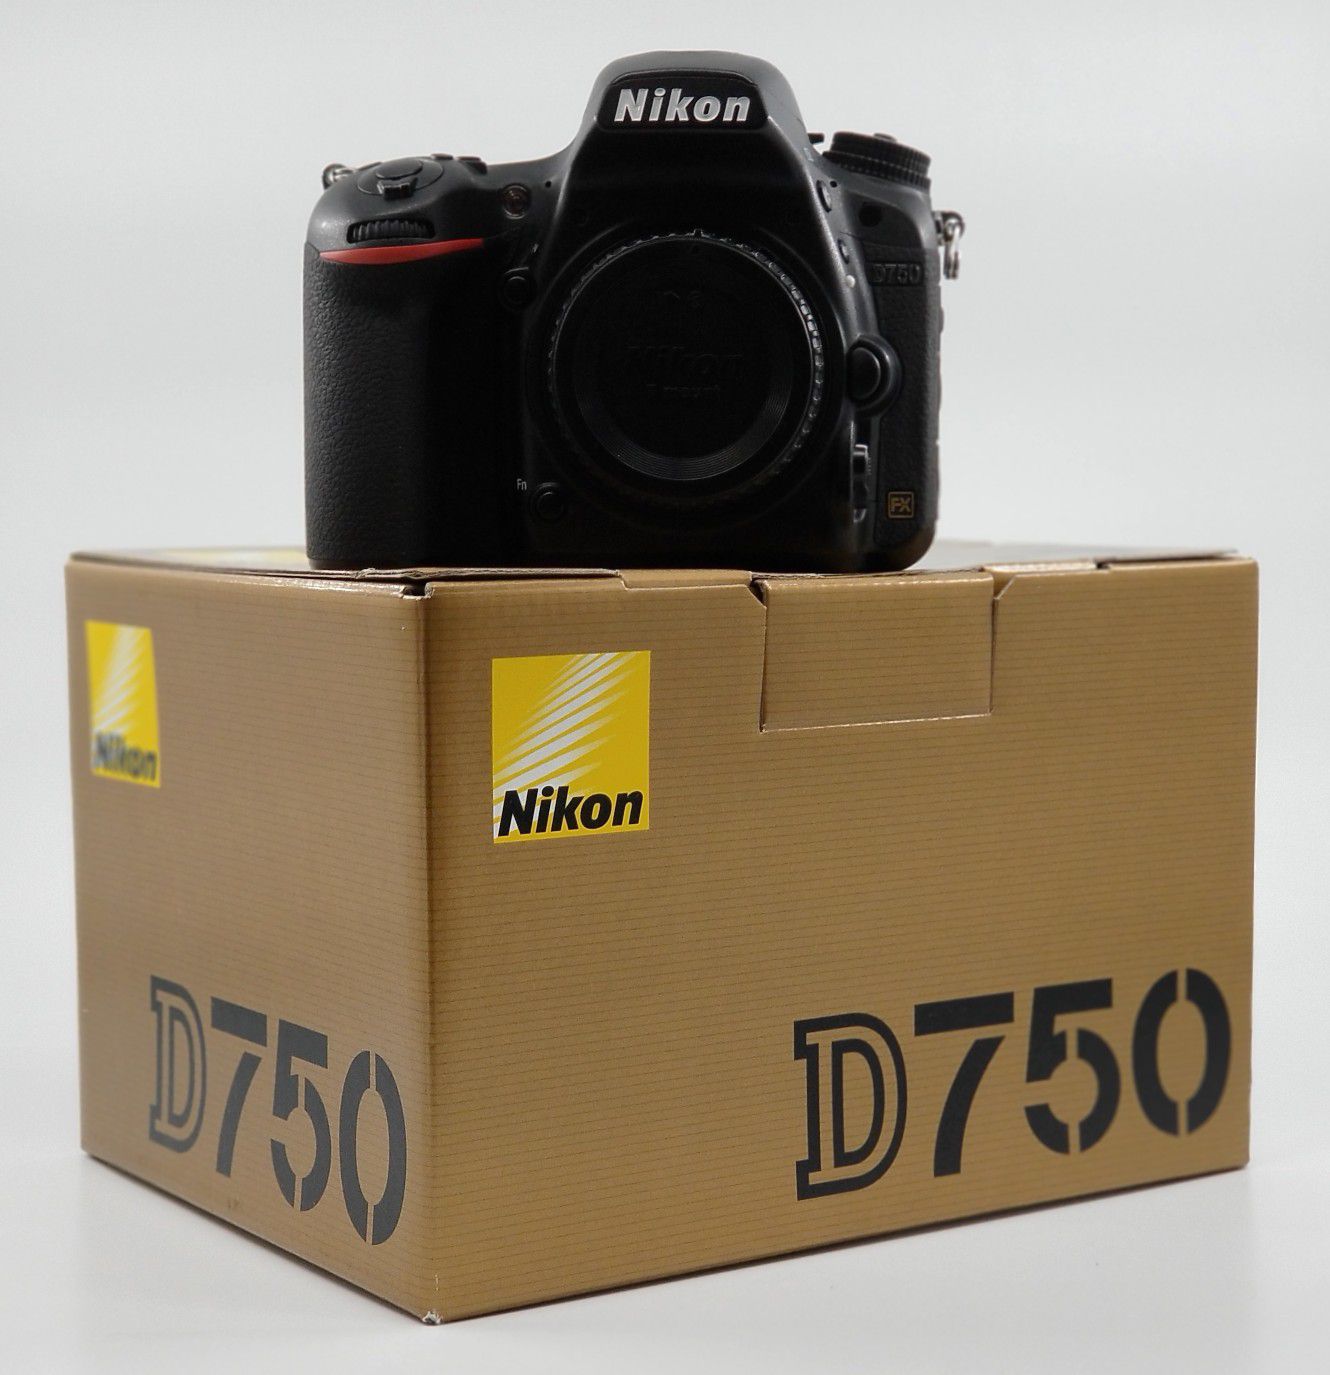 Nikon D750 body with flashpoint grip